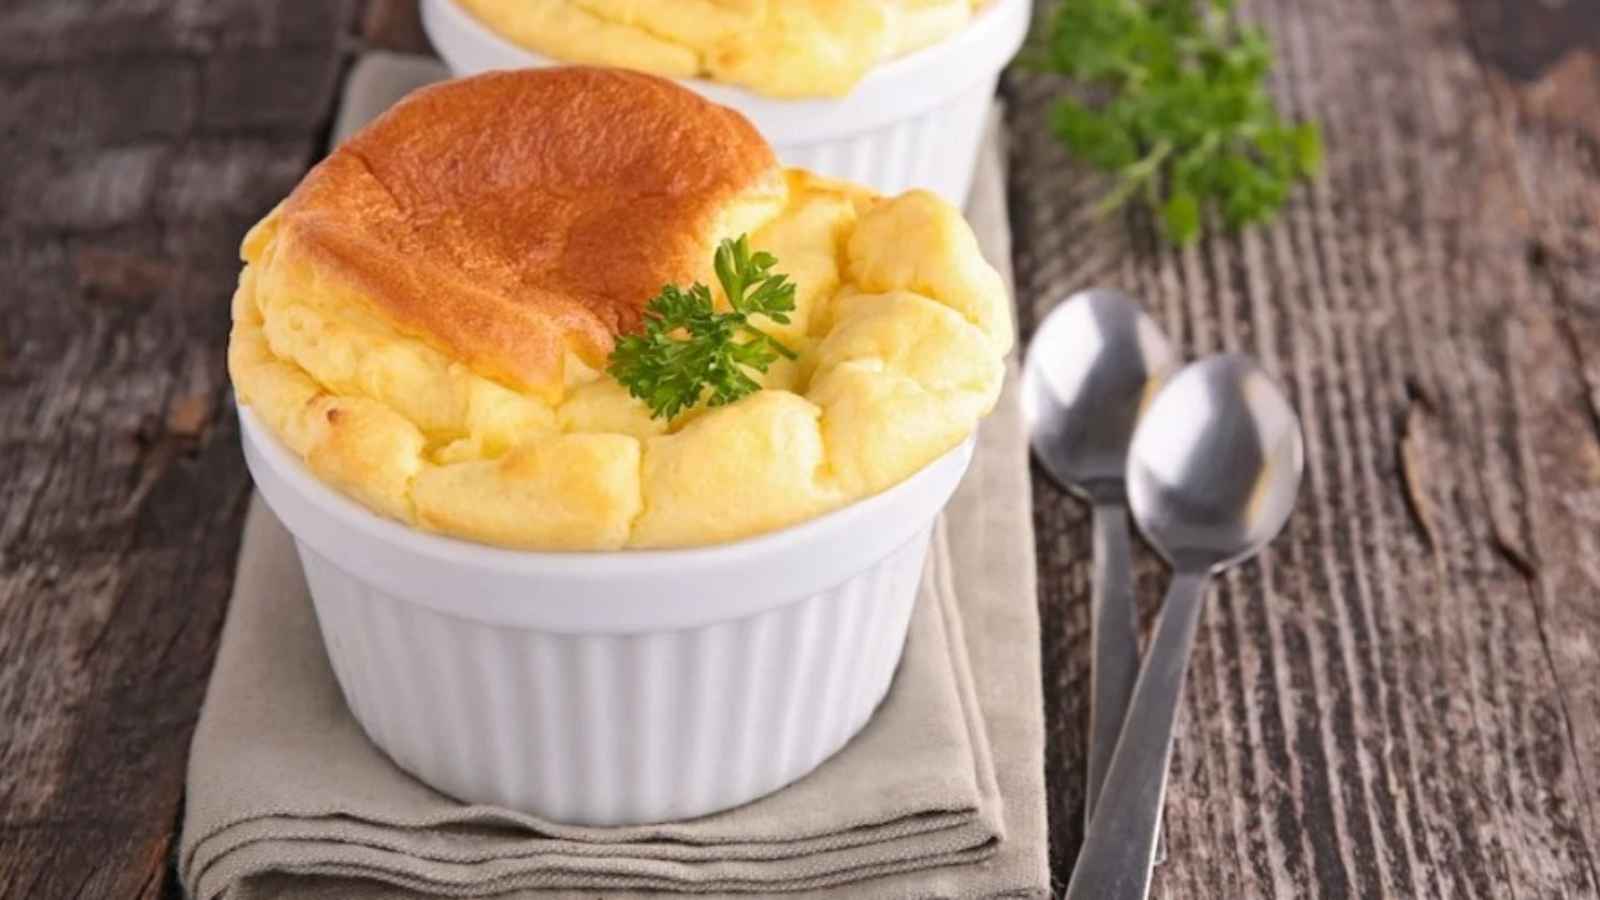 National Cheese Soufflé Day 2023: Date, History, Facts about Soufflé